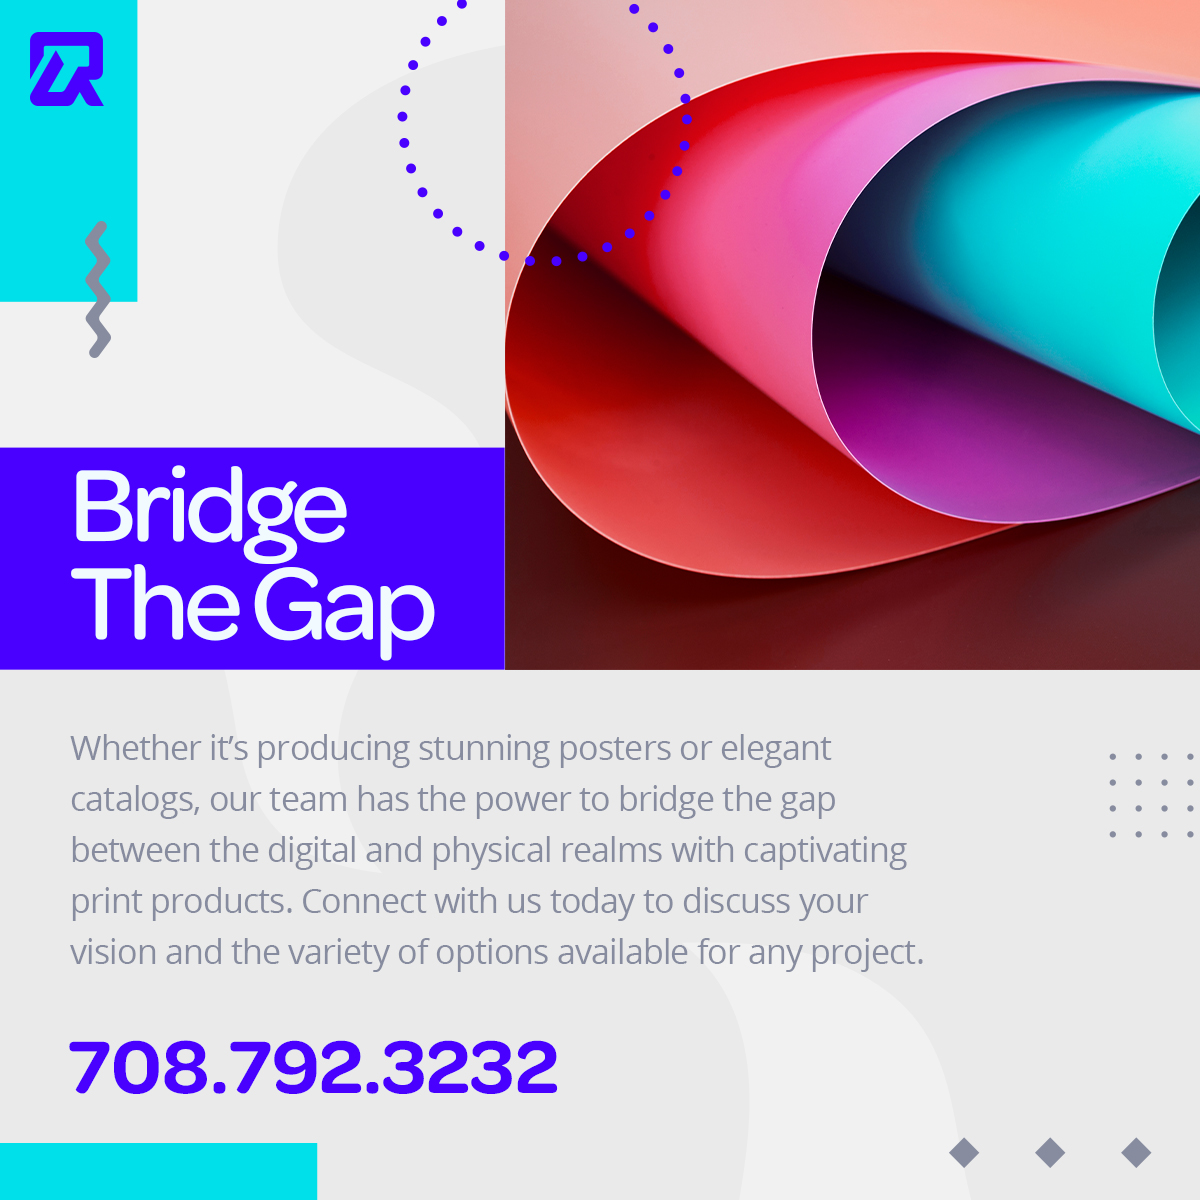 Our print solutions are more than just ink on paper – they're bridges that connect your brand with your audience in tangible ways. Let's discuss how we can elevate your print presence together!

#PrintSolutions #BridgingTheGap #PrintDesign #Printing #EDDM #CostSavings #Marketing